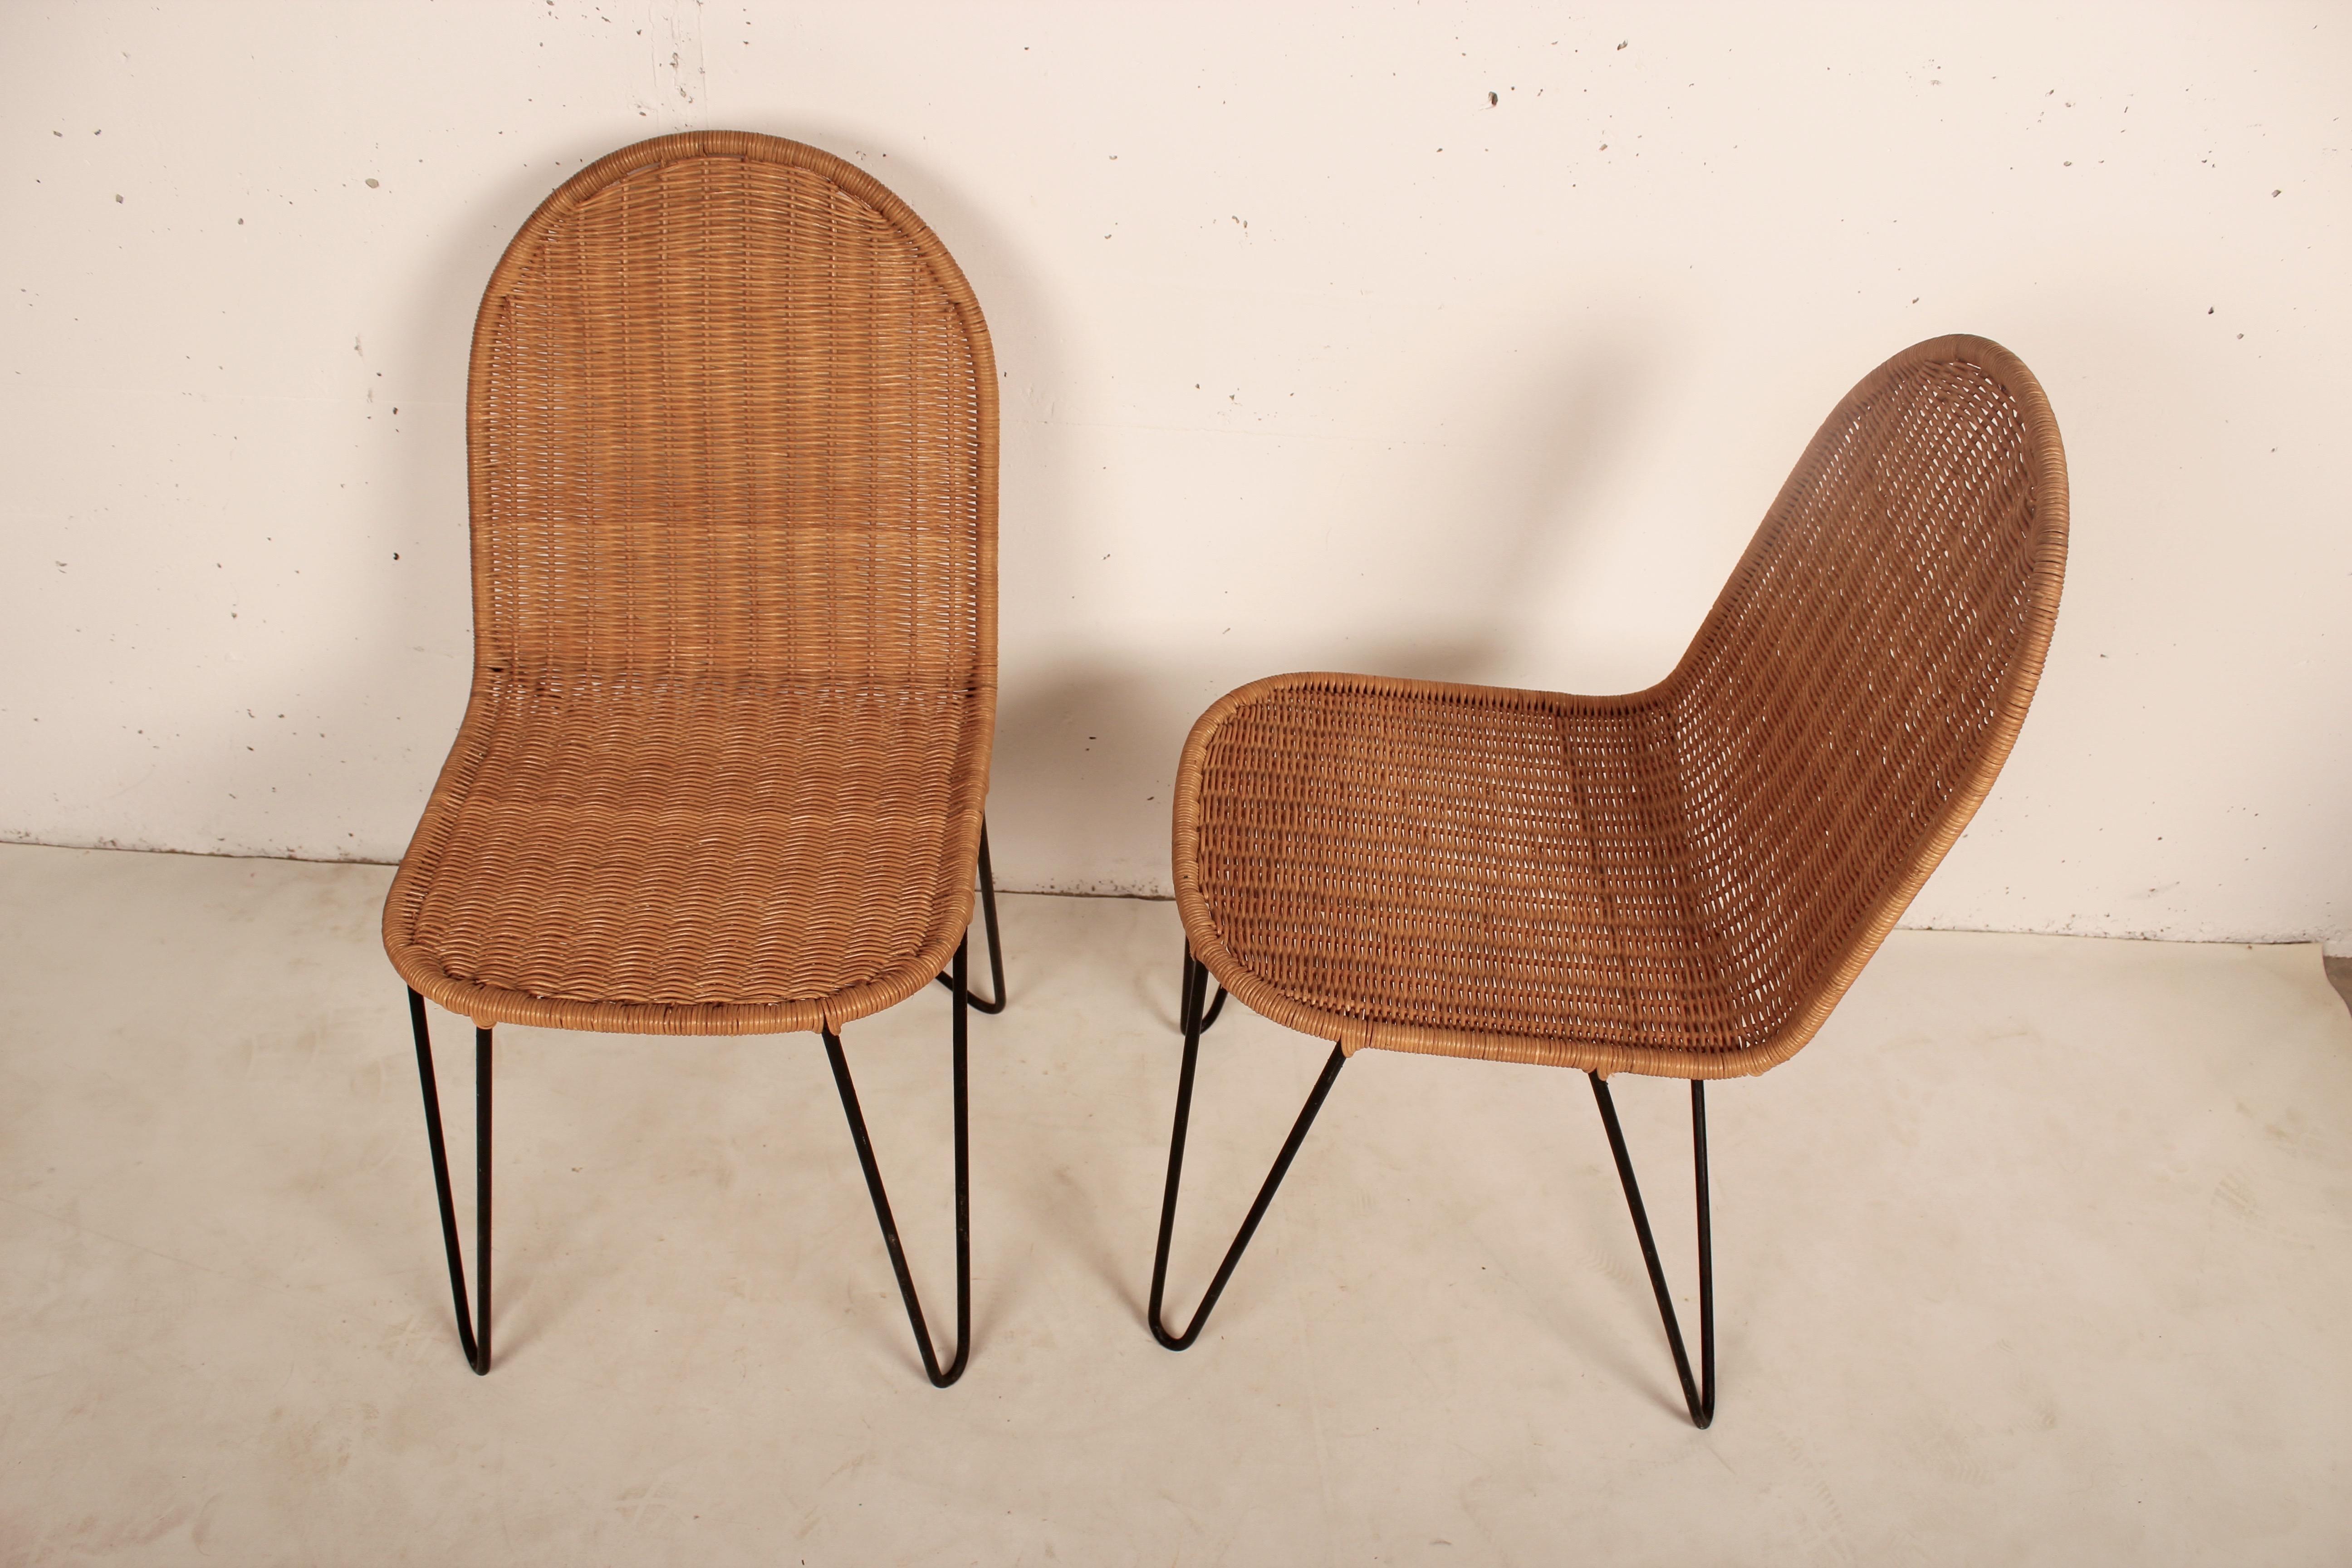 Mid-Century Modern Outdoor Rattan Wicker Set, Coffee Table and 2 Chairs by Raoul Guys, France, 1950